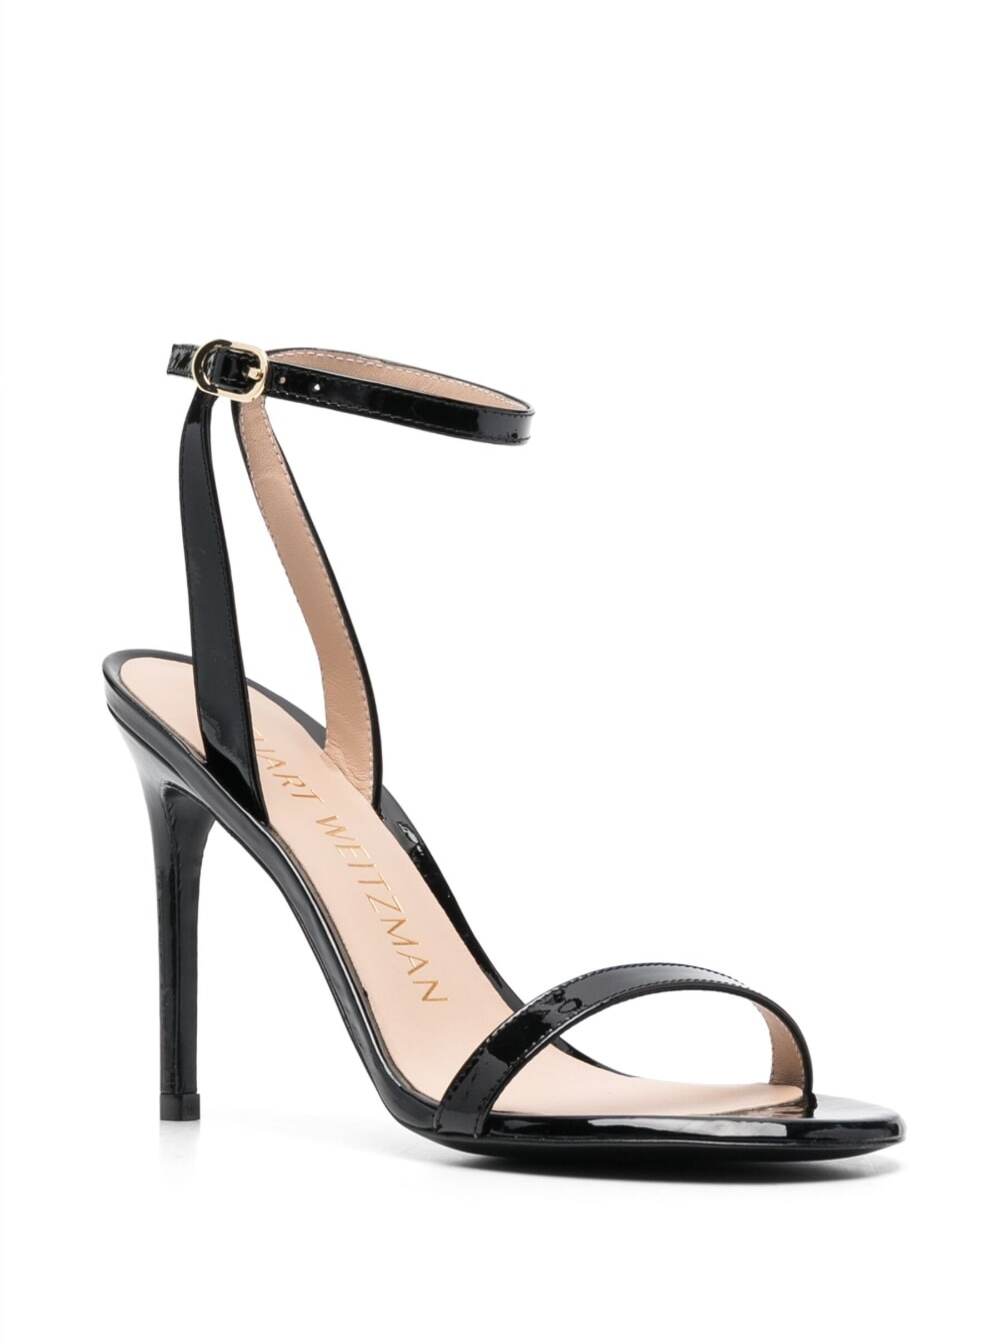 Shop Stuart Weitzman Barely Nude Black Sandals With Stiletto Heel In Patent Leather Woman